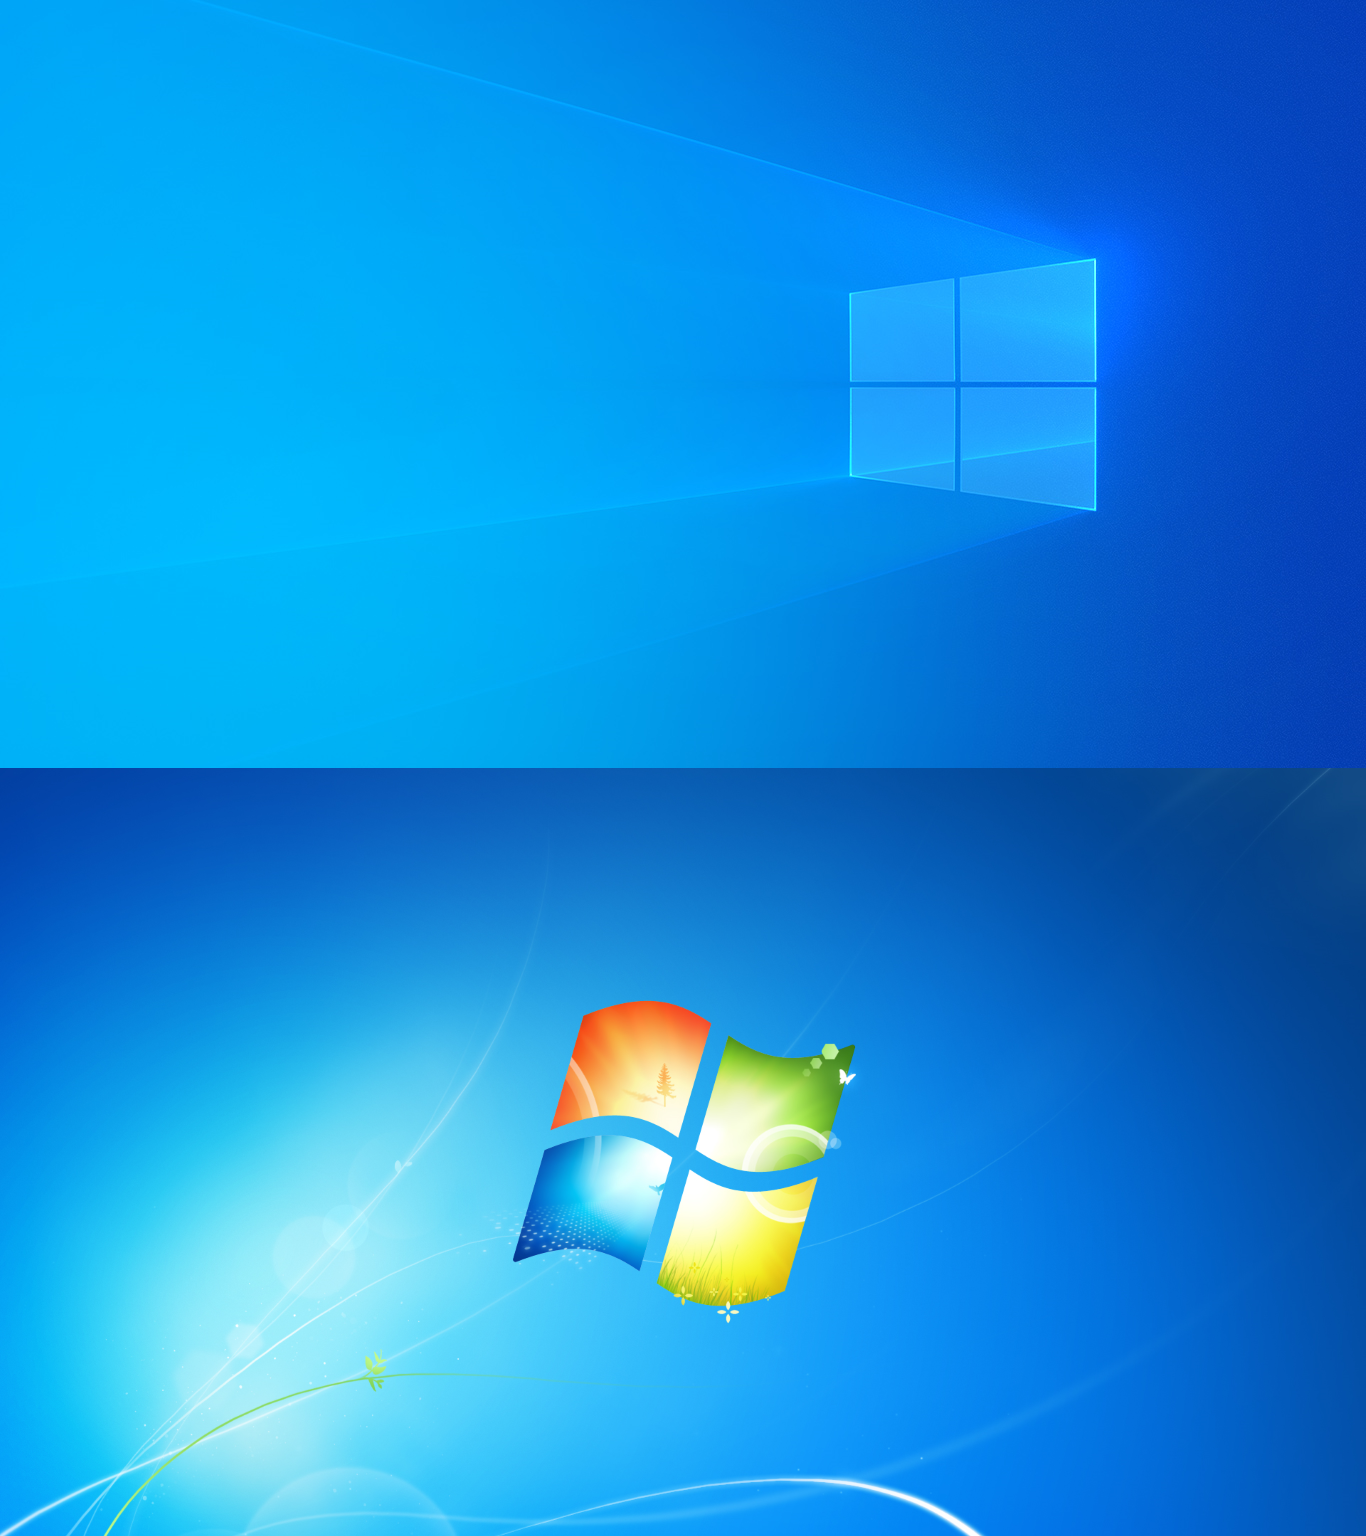 Is It Just Me Or Does The New Windows Desktop Background Remind